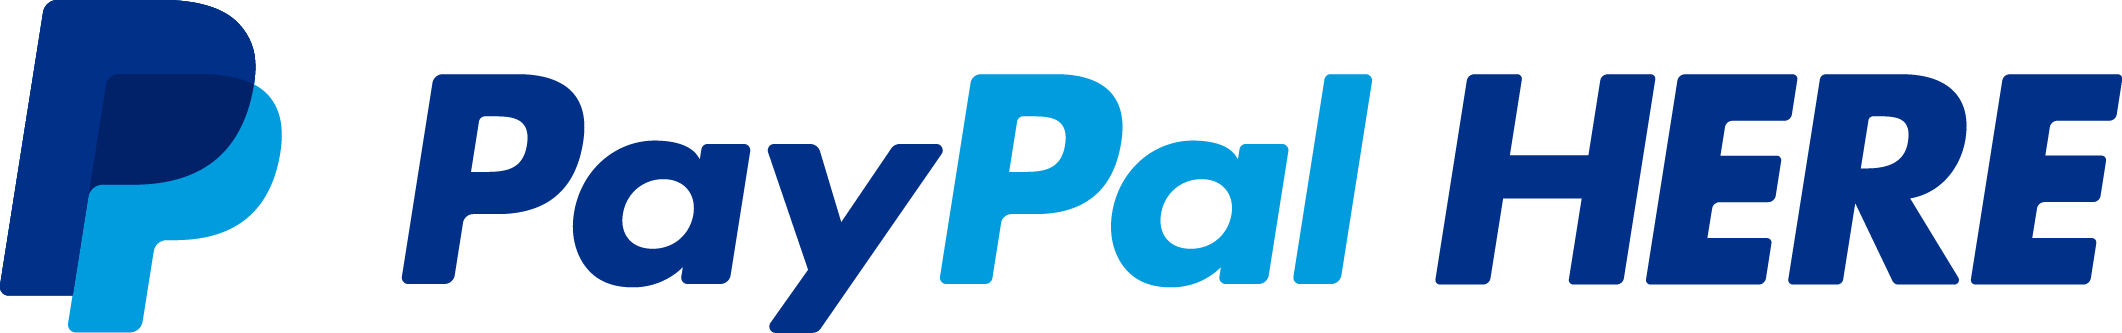 PayPal Here App Logo - Sign Up For PayPal Here